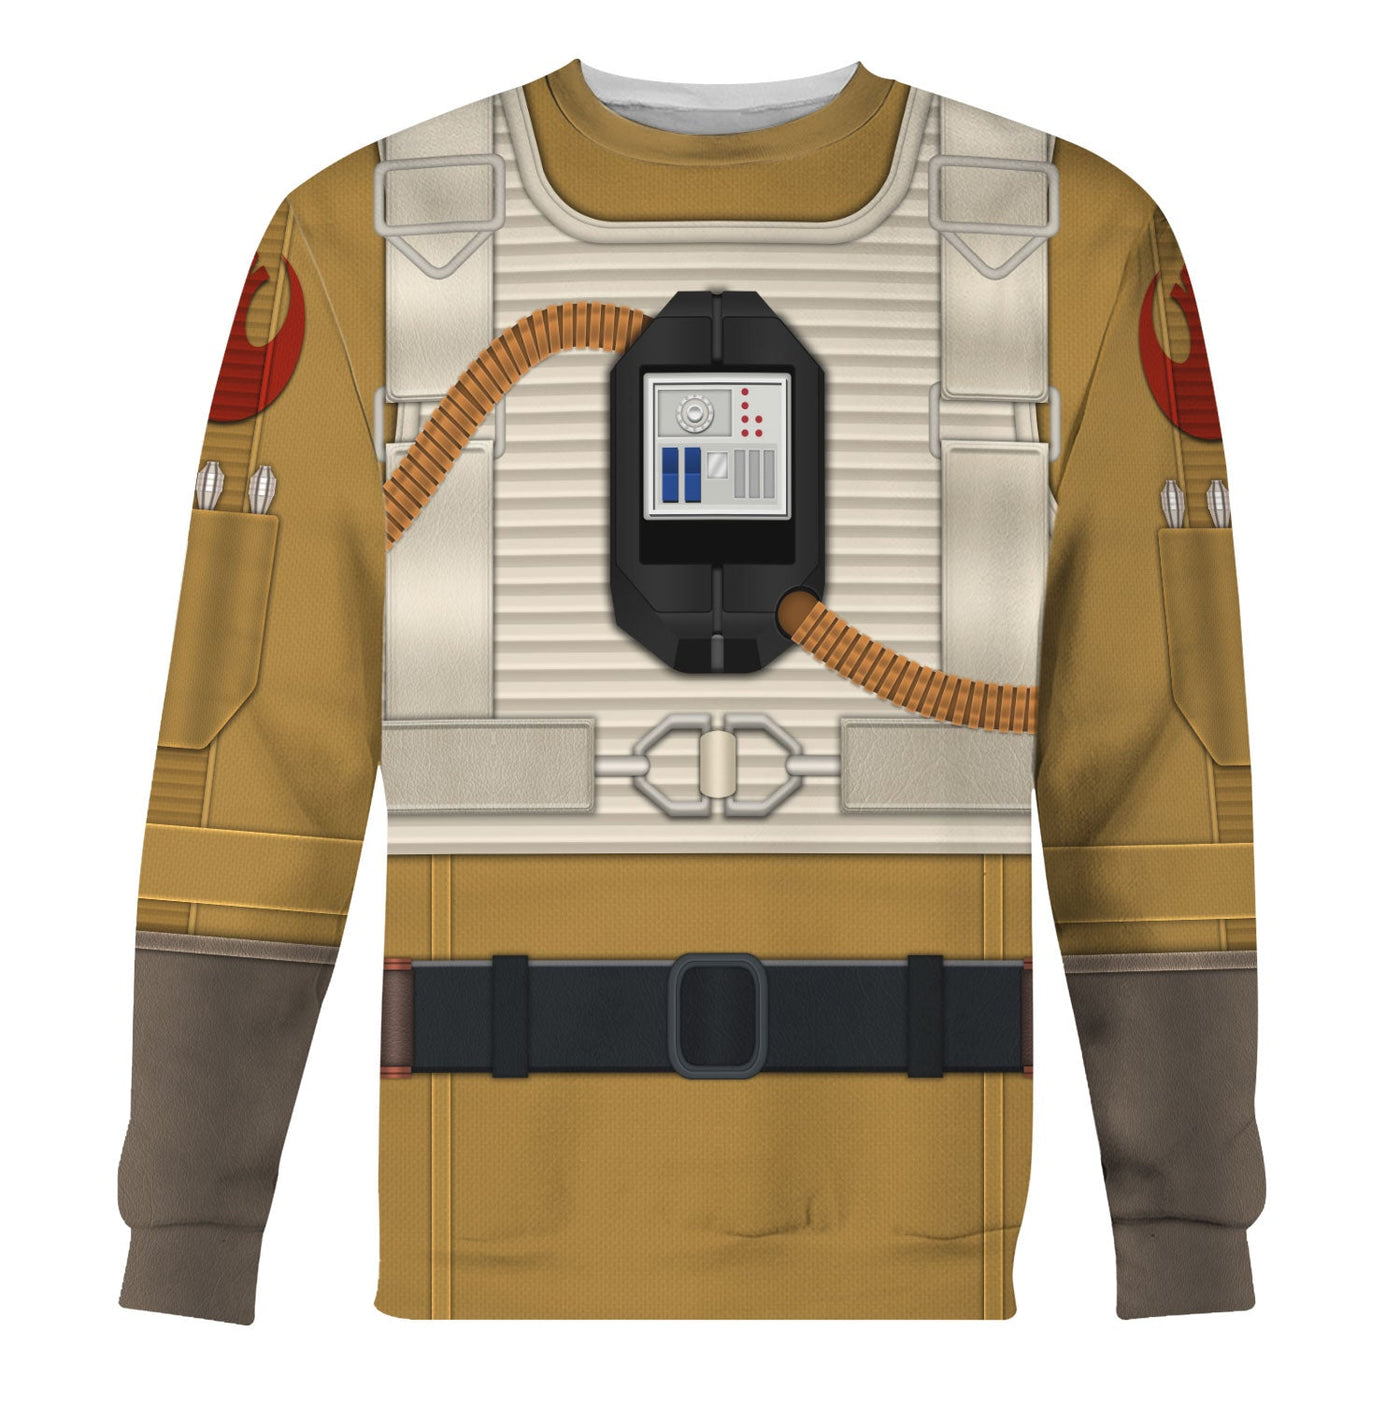 Star Wars Paige Tico's Pilot Costume - Sweater - Ugly Christmas Sweater